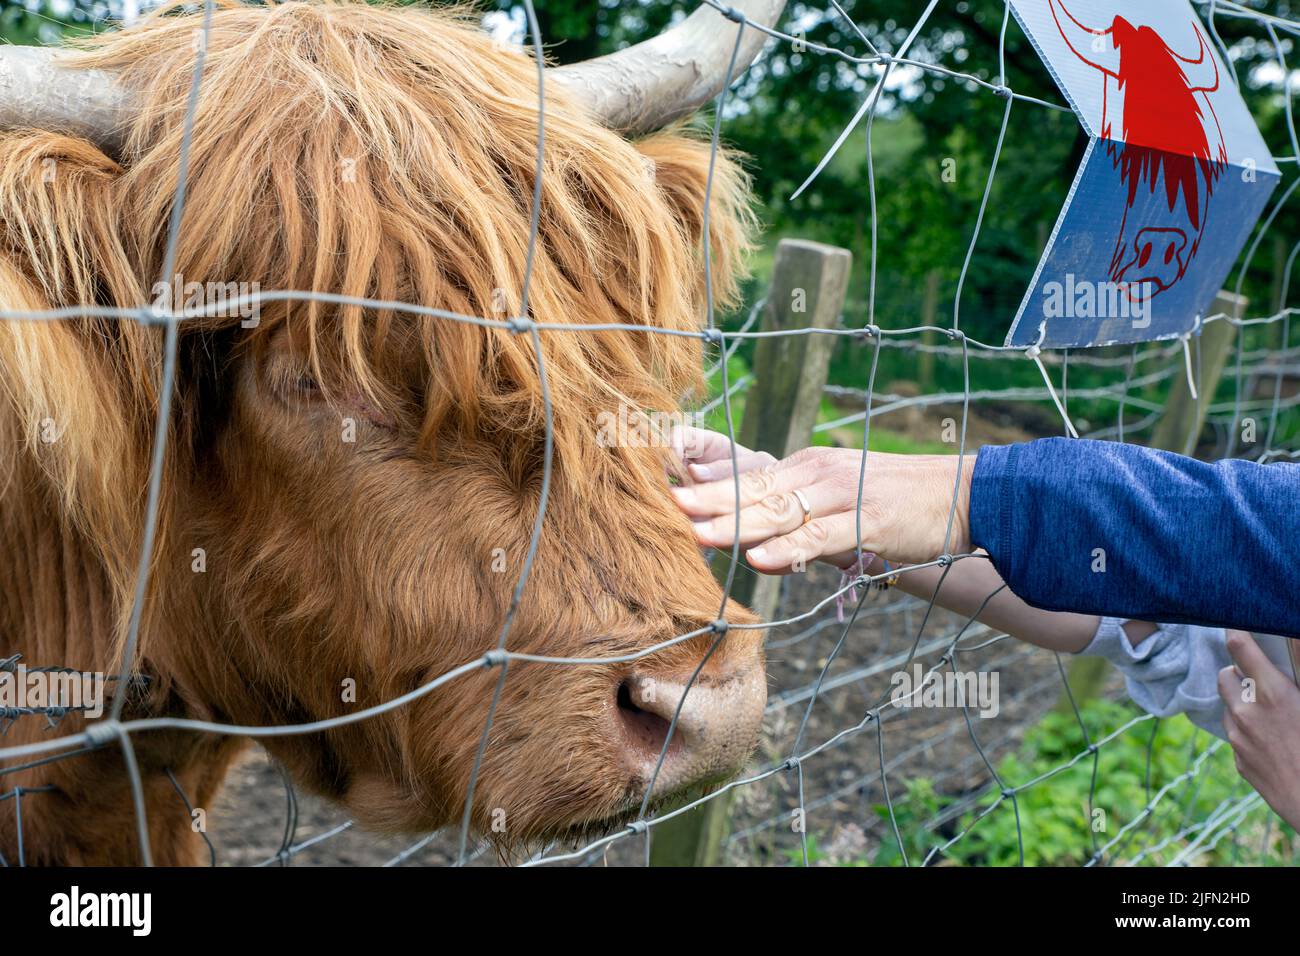 Highland cattle or Highland cow it's a Scottish breed of rustic cattle. It originated in the Scottish Highlands and the Outer Hebrides. Stock Photo